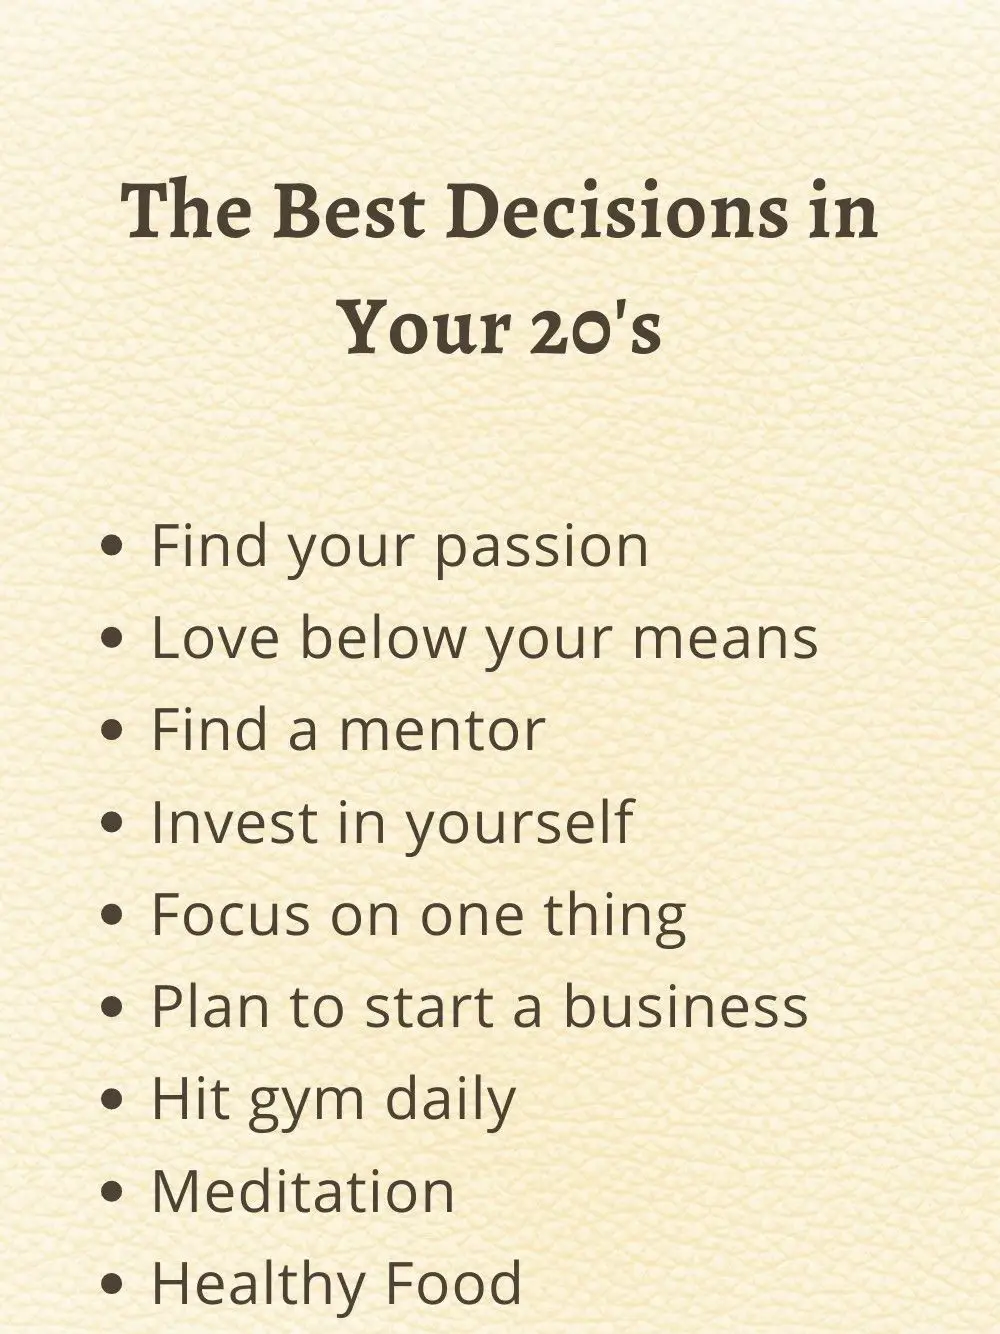  A list of best decisions in your 20's